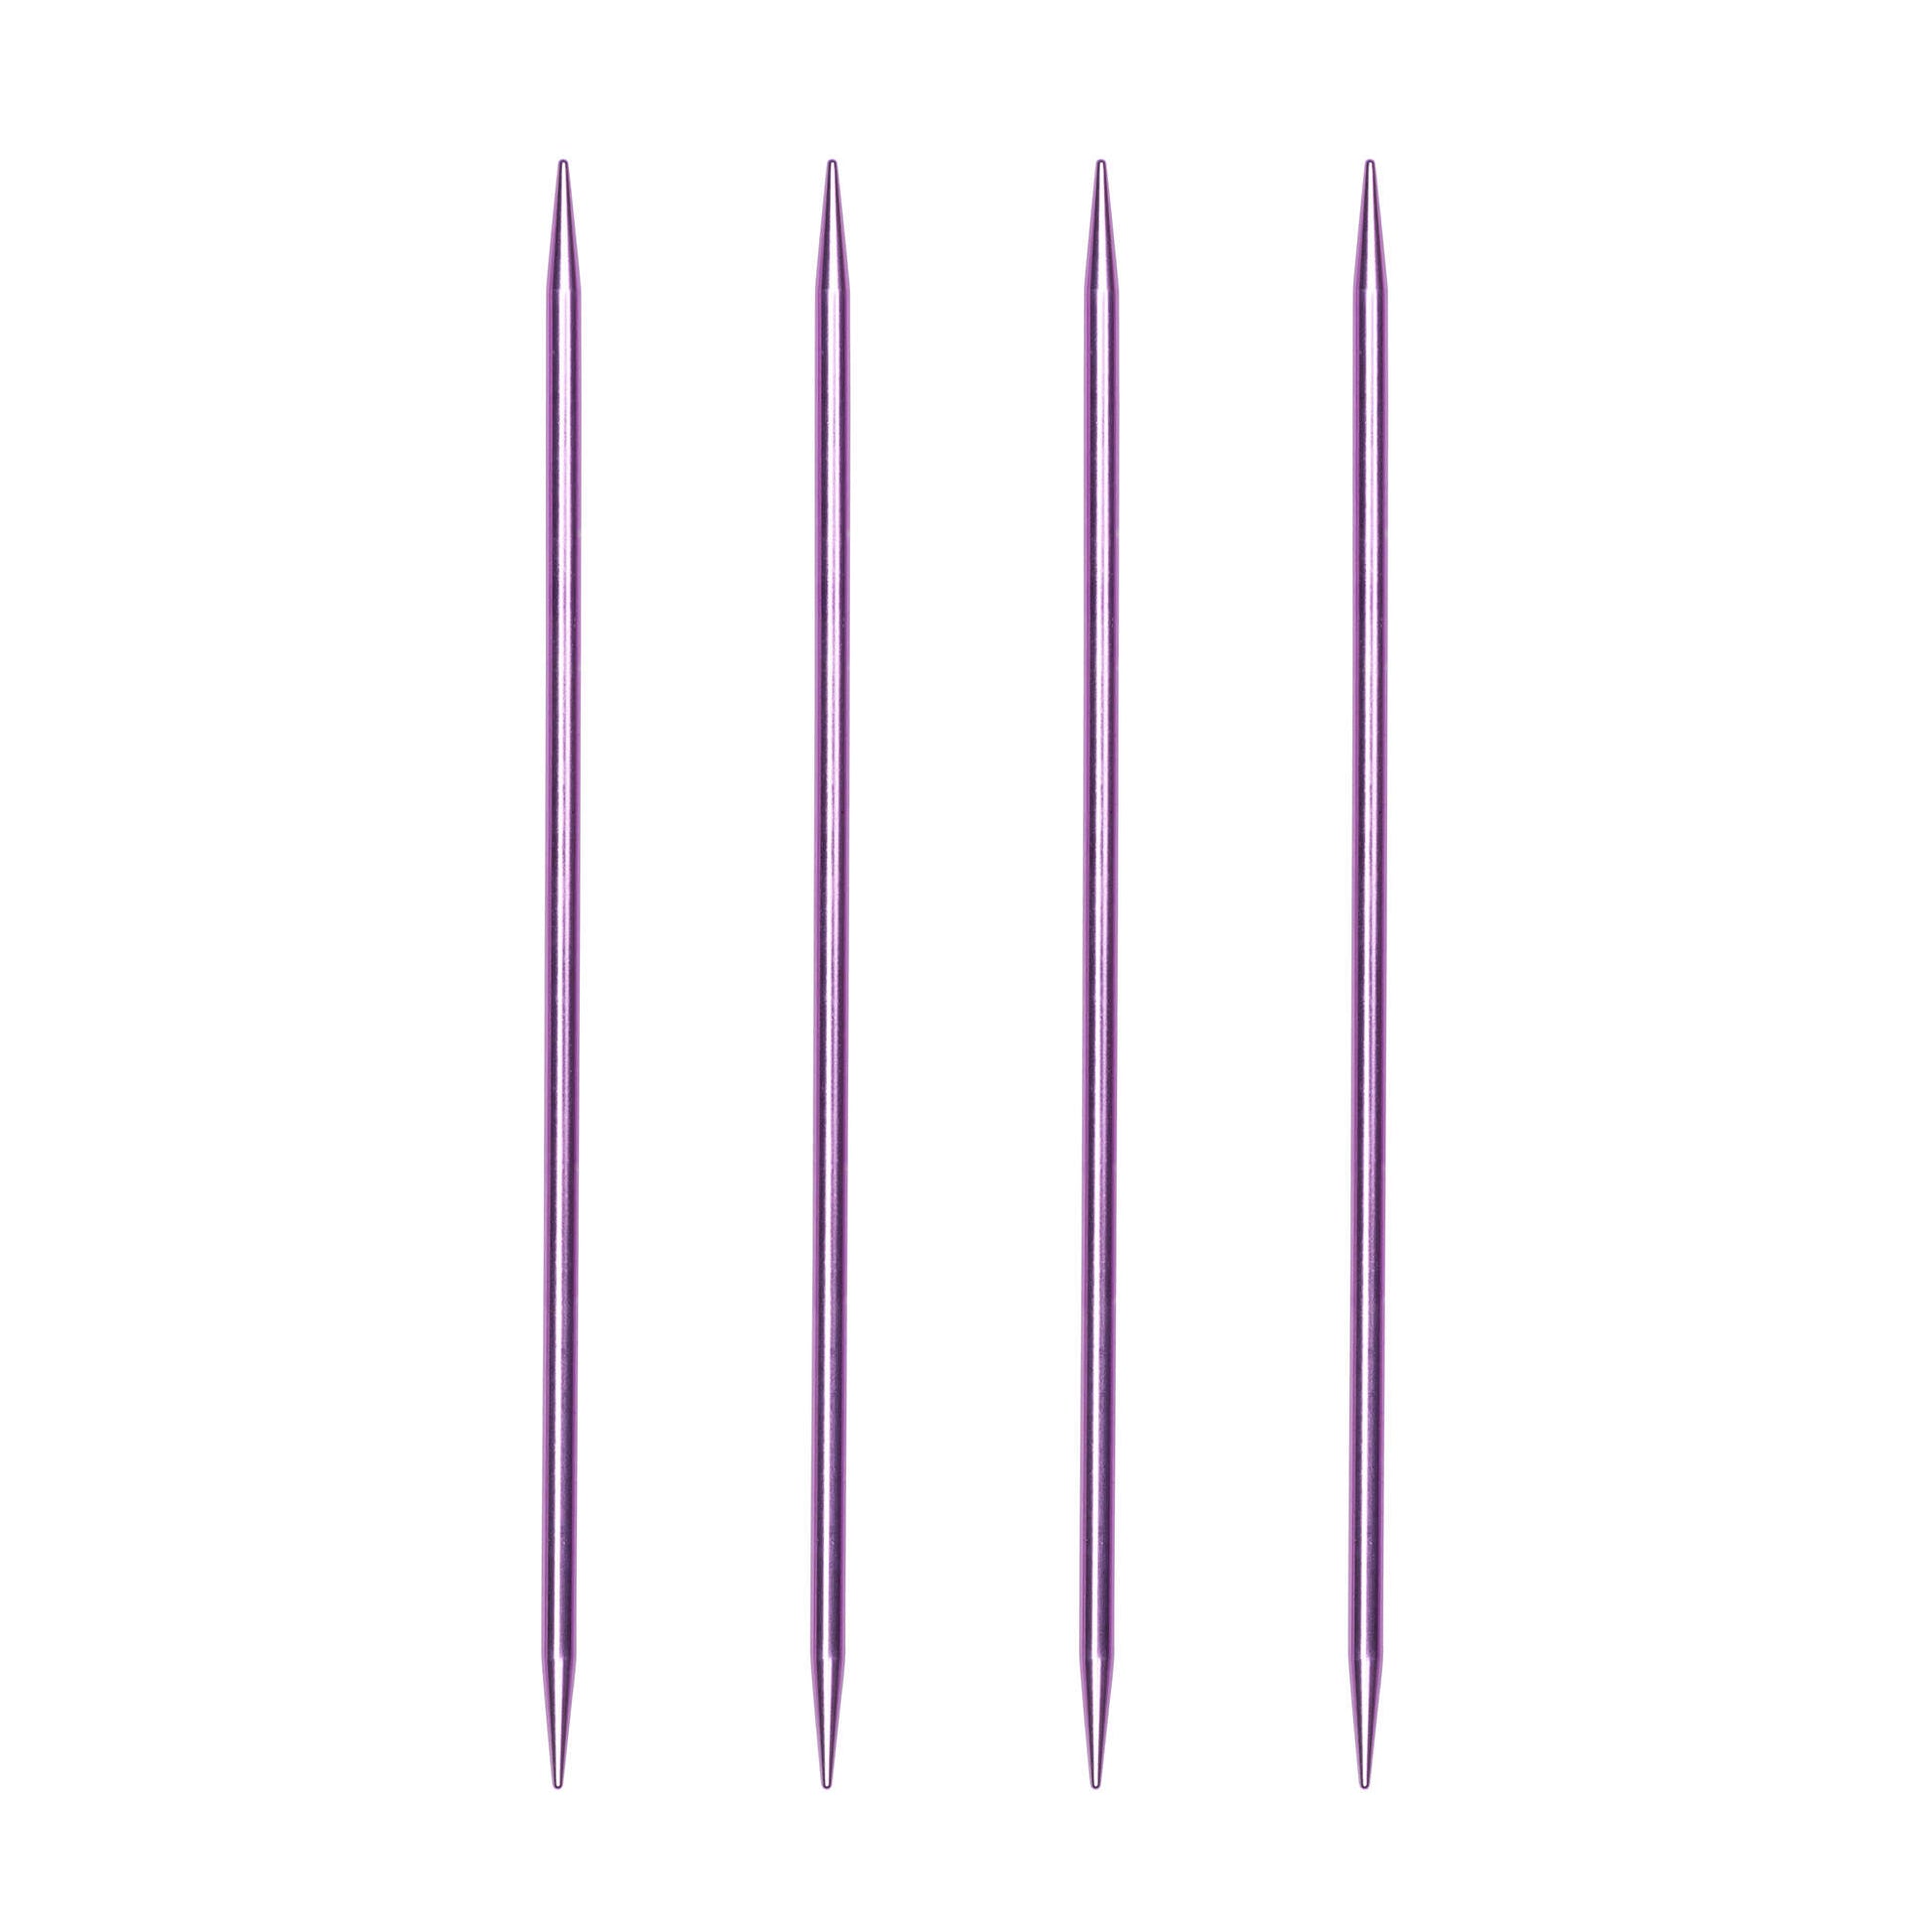 Susan Bates Silvalume 4 Pack, Double Point Knitting Needles U.S. 6 (4 mm)